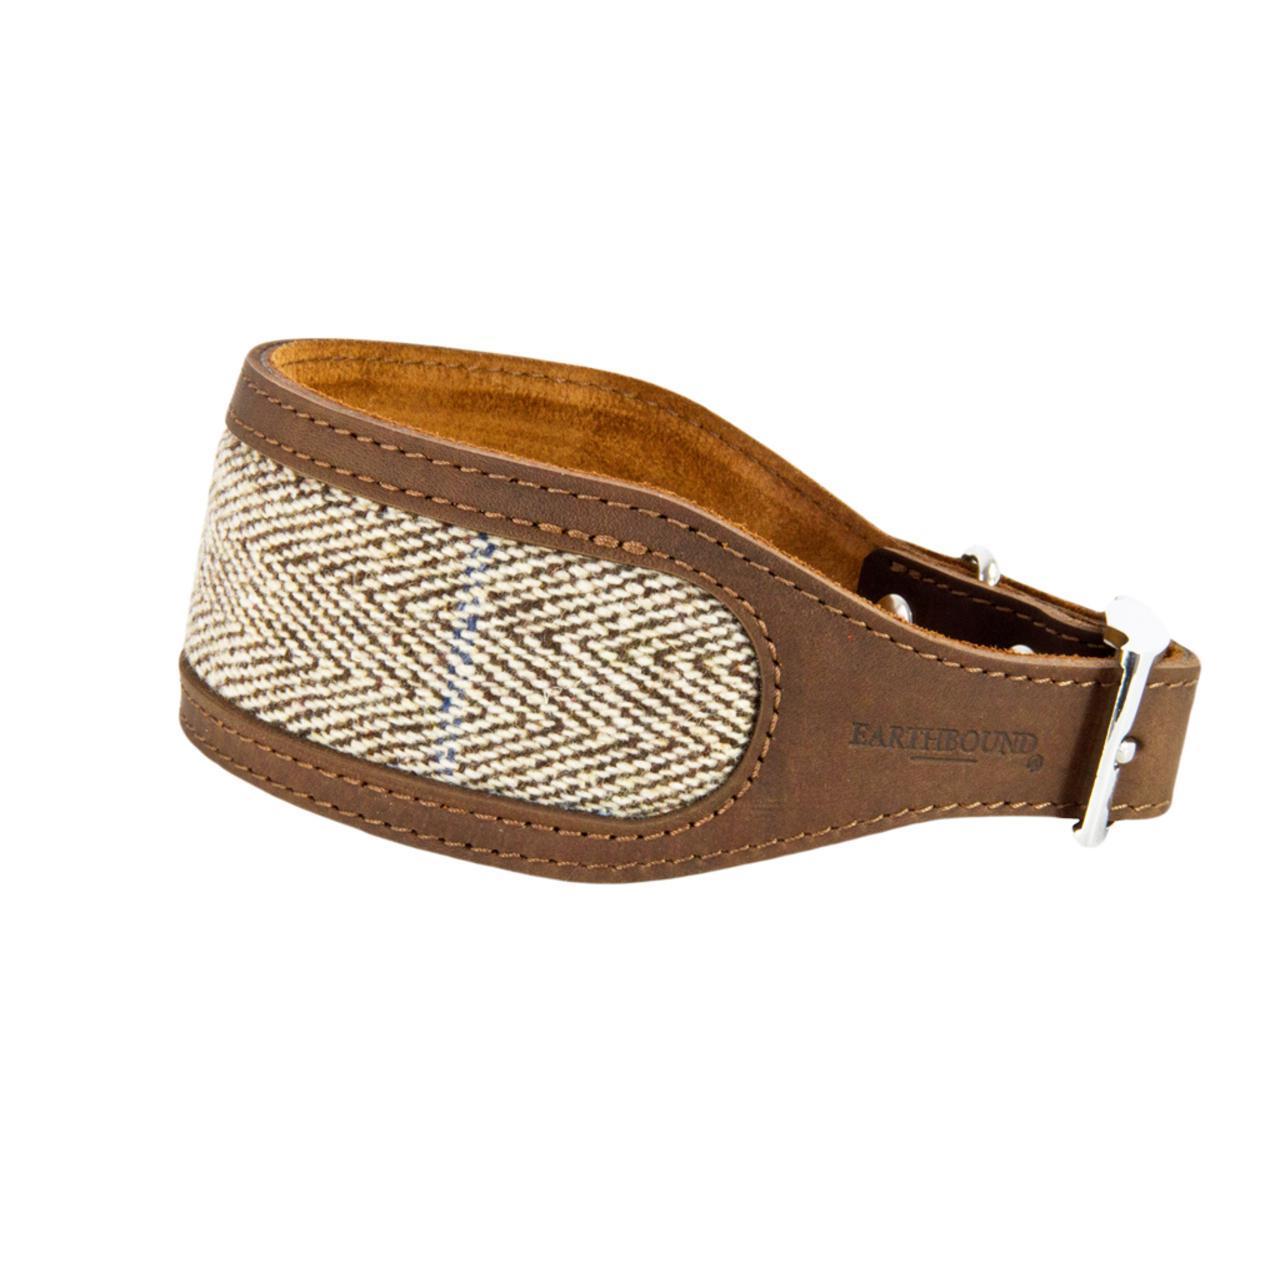 An image of Earthbound Tweed & Leather Whippet & Greyhound Collar Beige 27 - 33cm